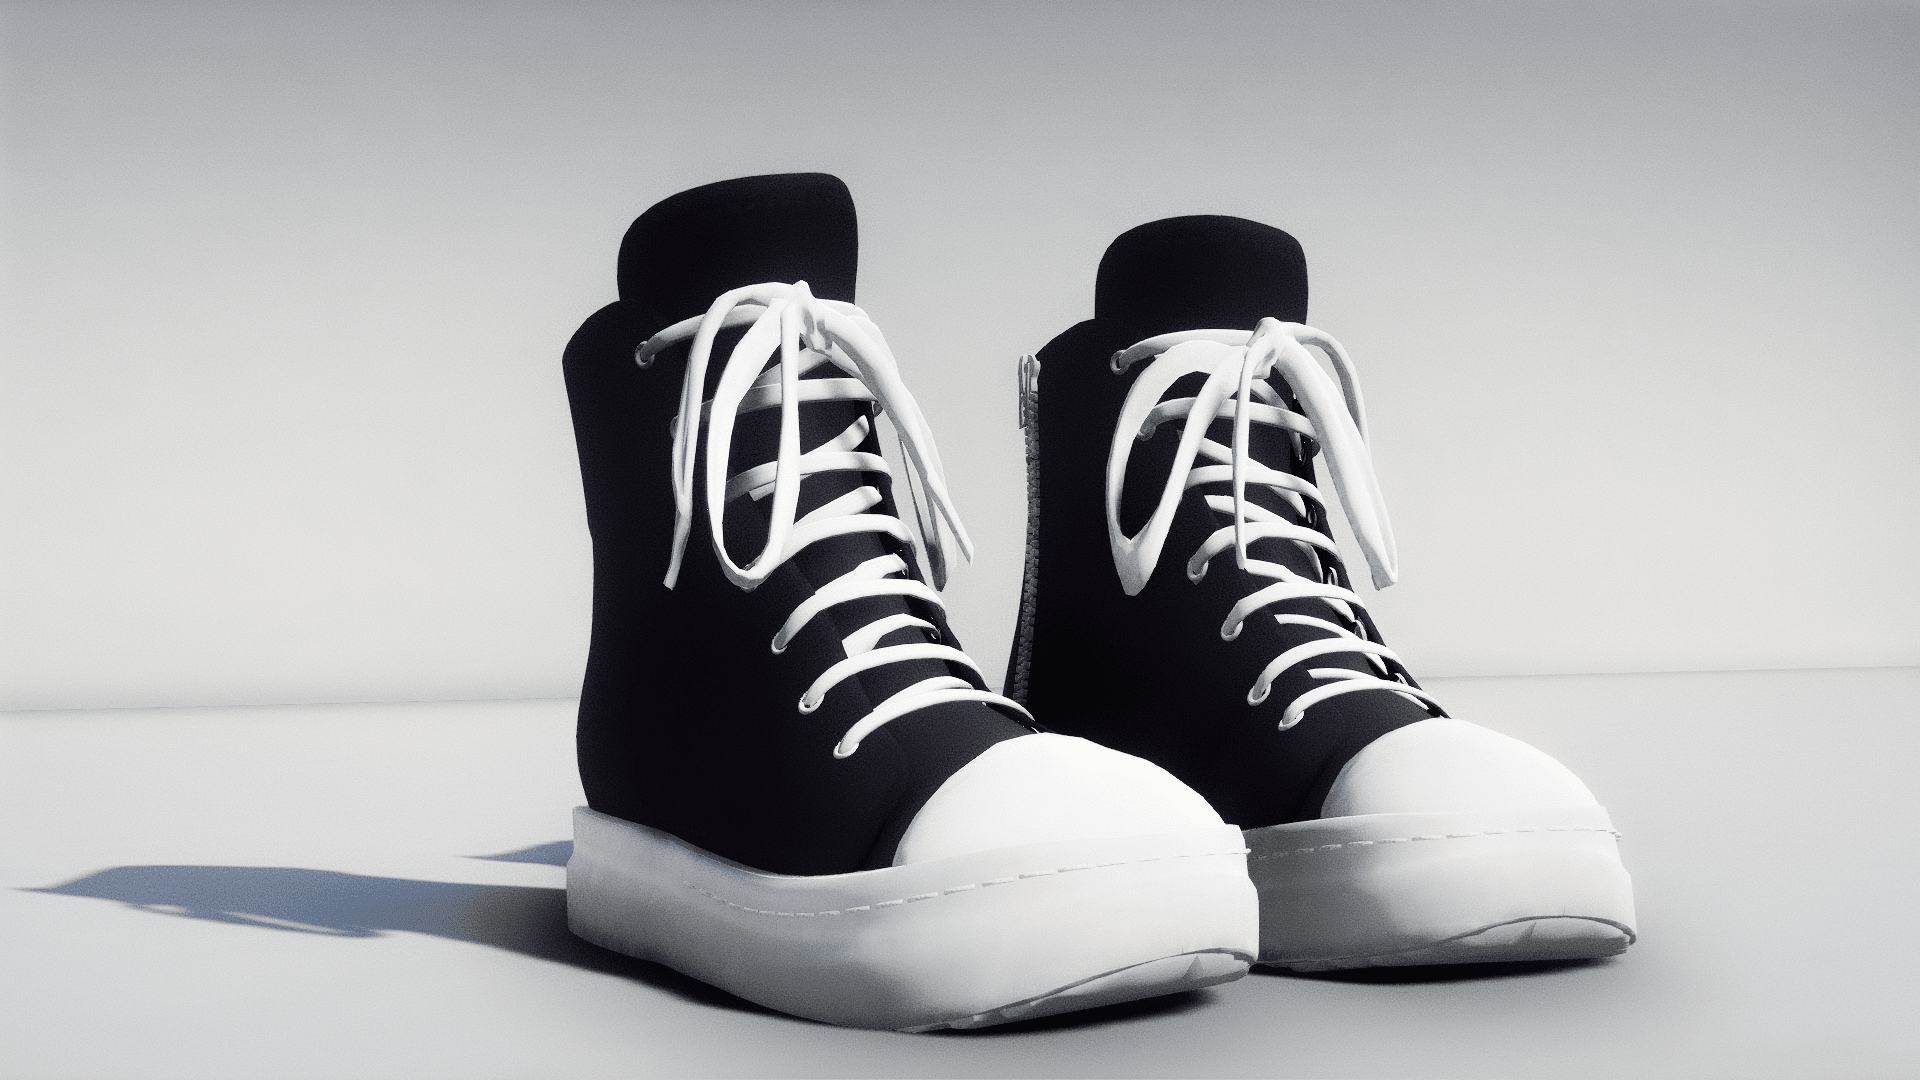 How to style Rick Owens RAMONES - Men's Fashion tips / advice ~ 